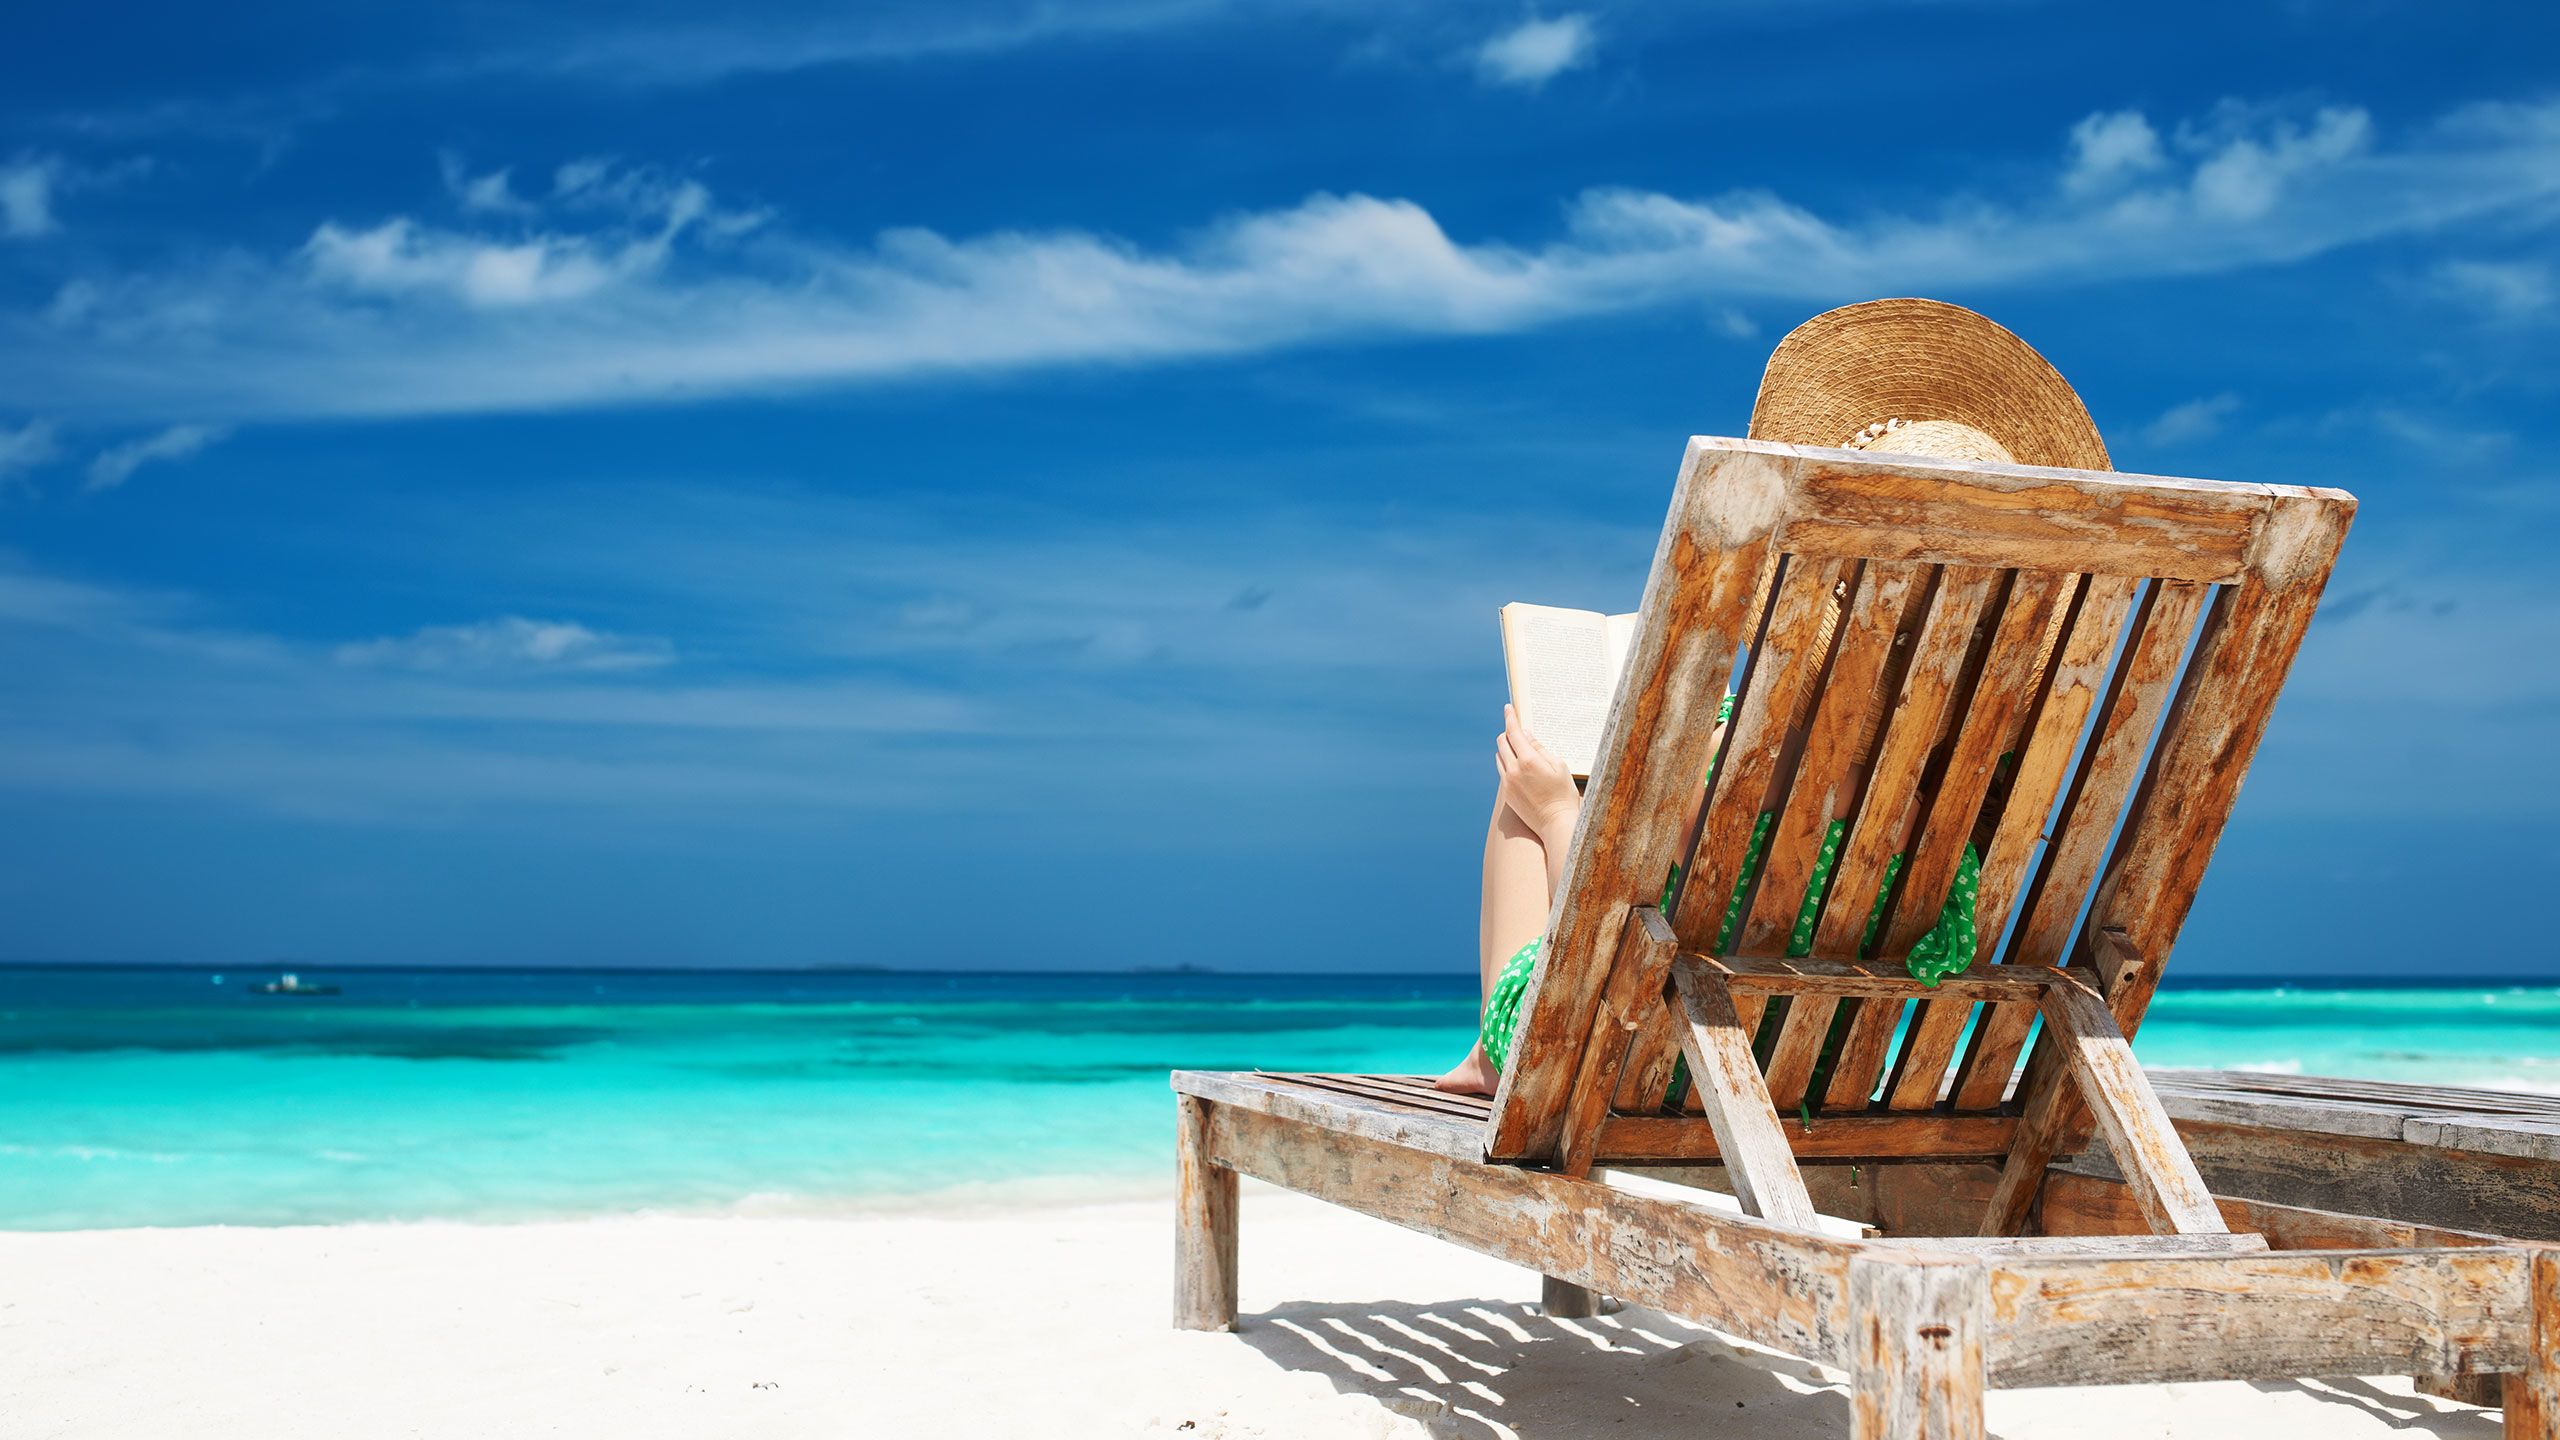 A woman reads a book in a wooden lounge chair on the beach, looking out at the blue ocean and blue sky